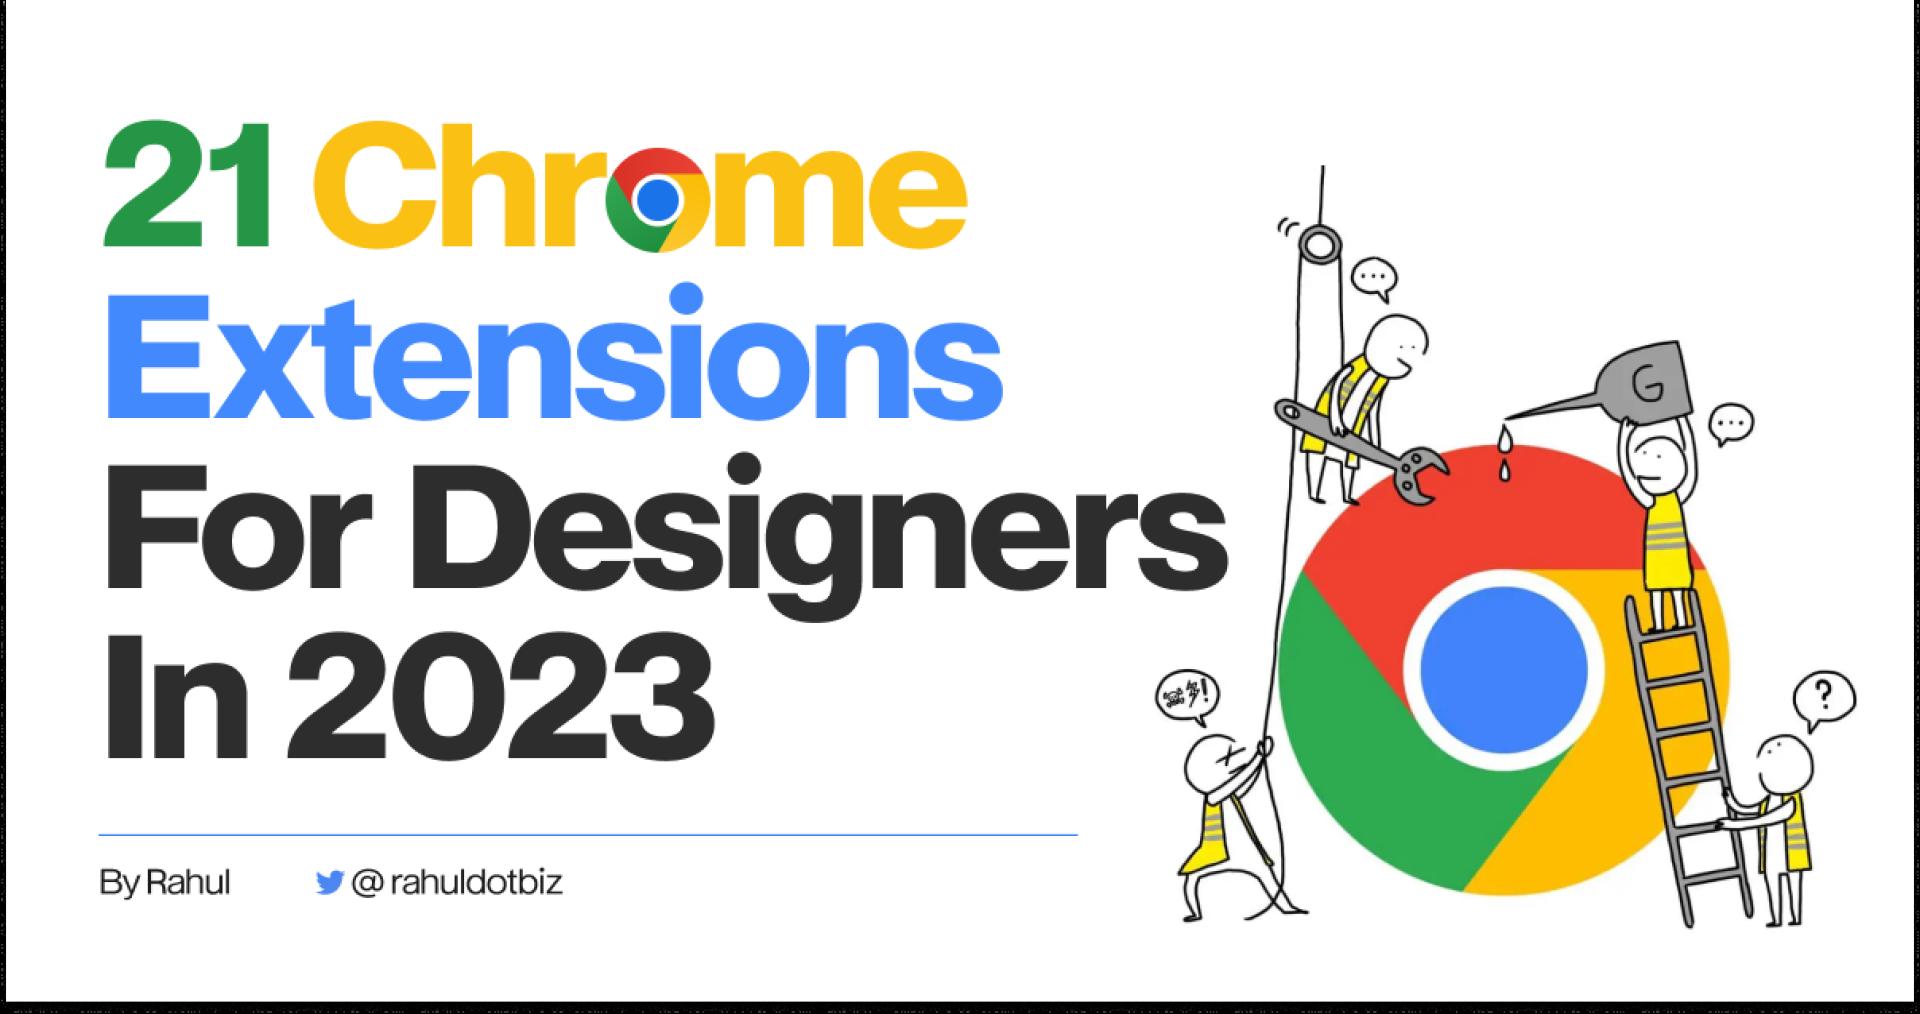 Top 21 Chrome Extensions for Designers and Developers in 2023